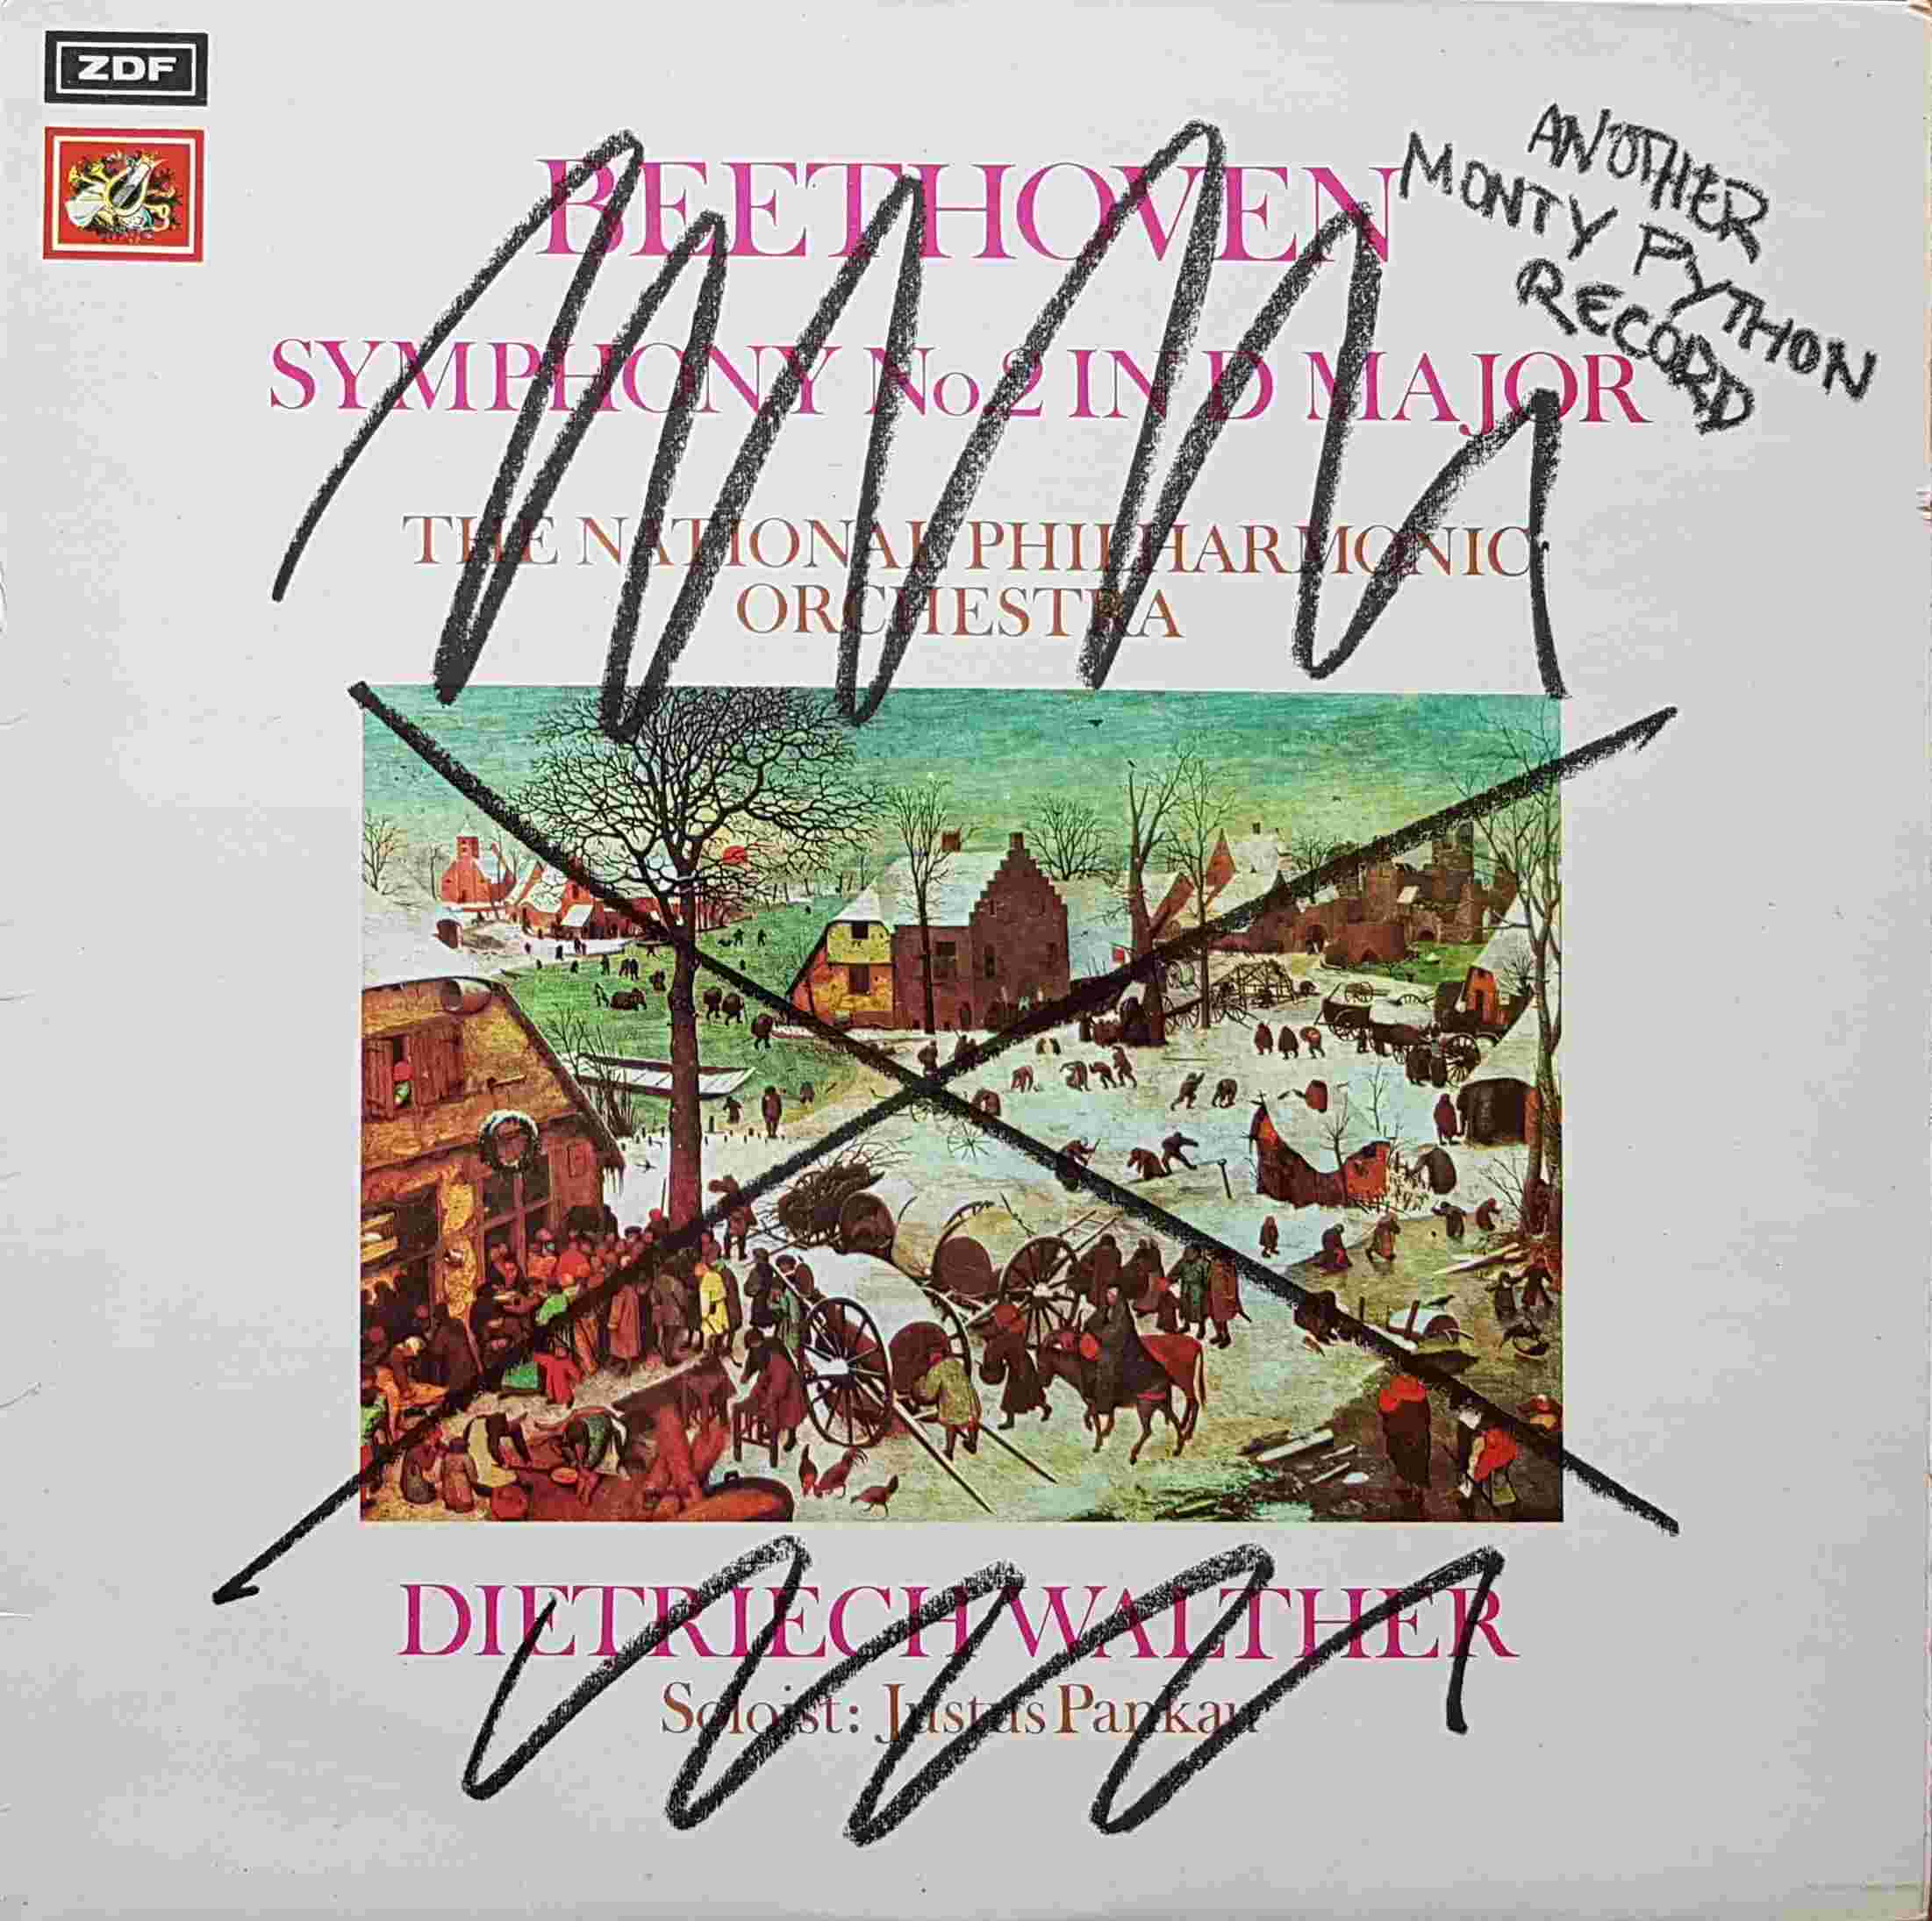 Picture of Another Monty Python record by artist Monty Python from the BBC albums - Records and Tapes library